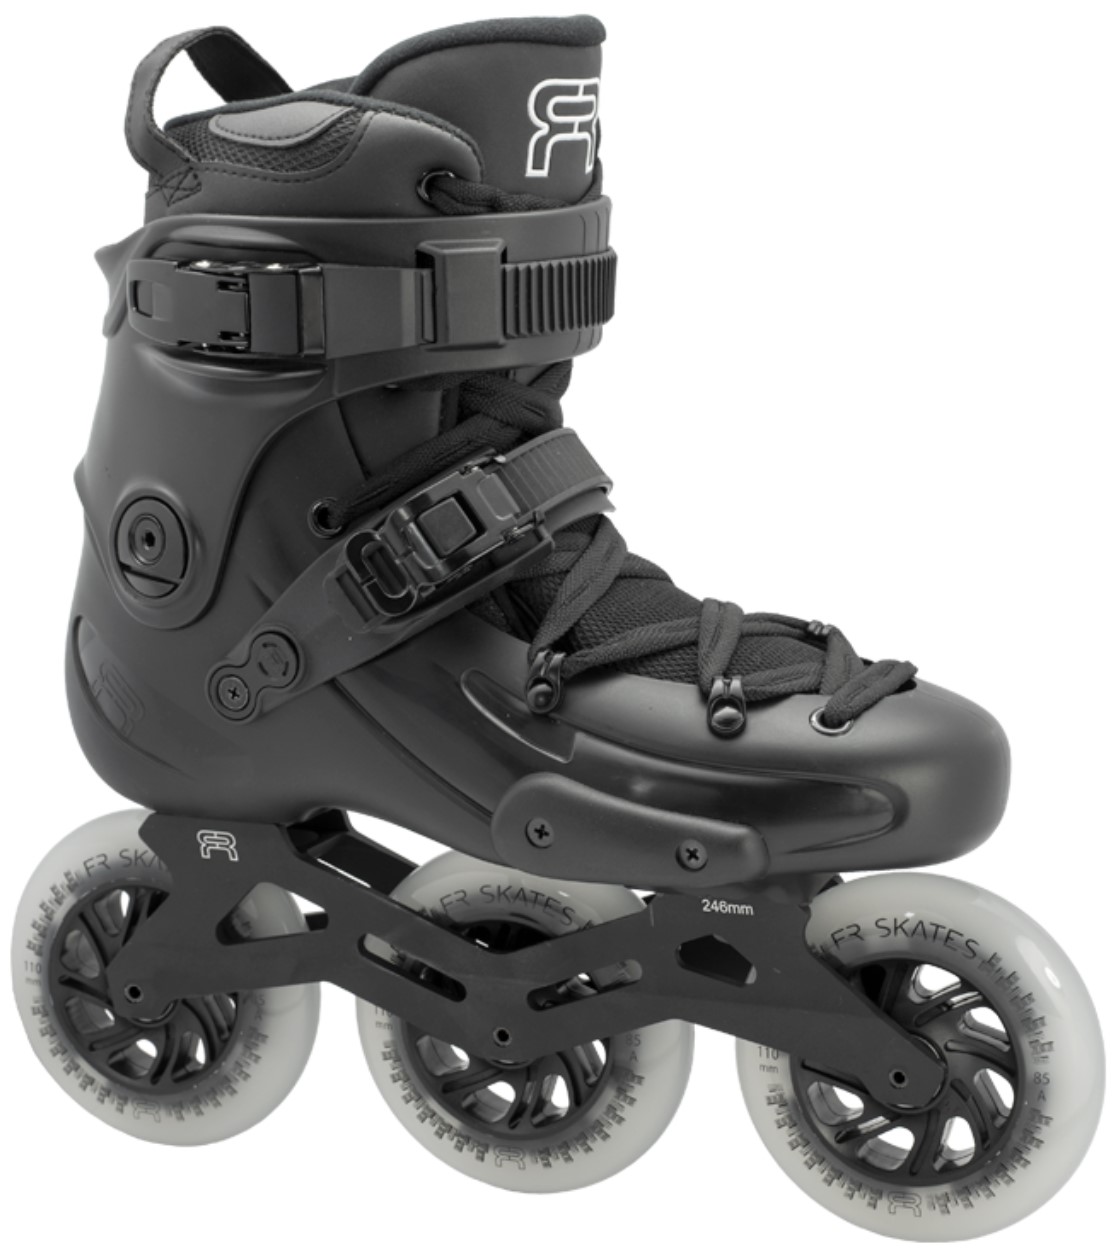 FR2 inline skate with 3 downtown 110 mm wheels